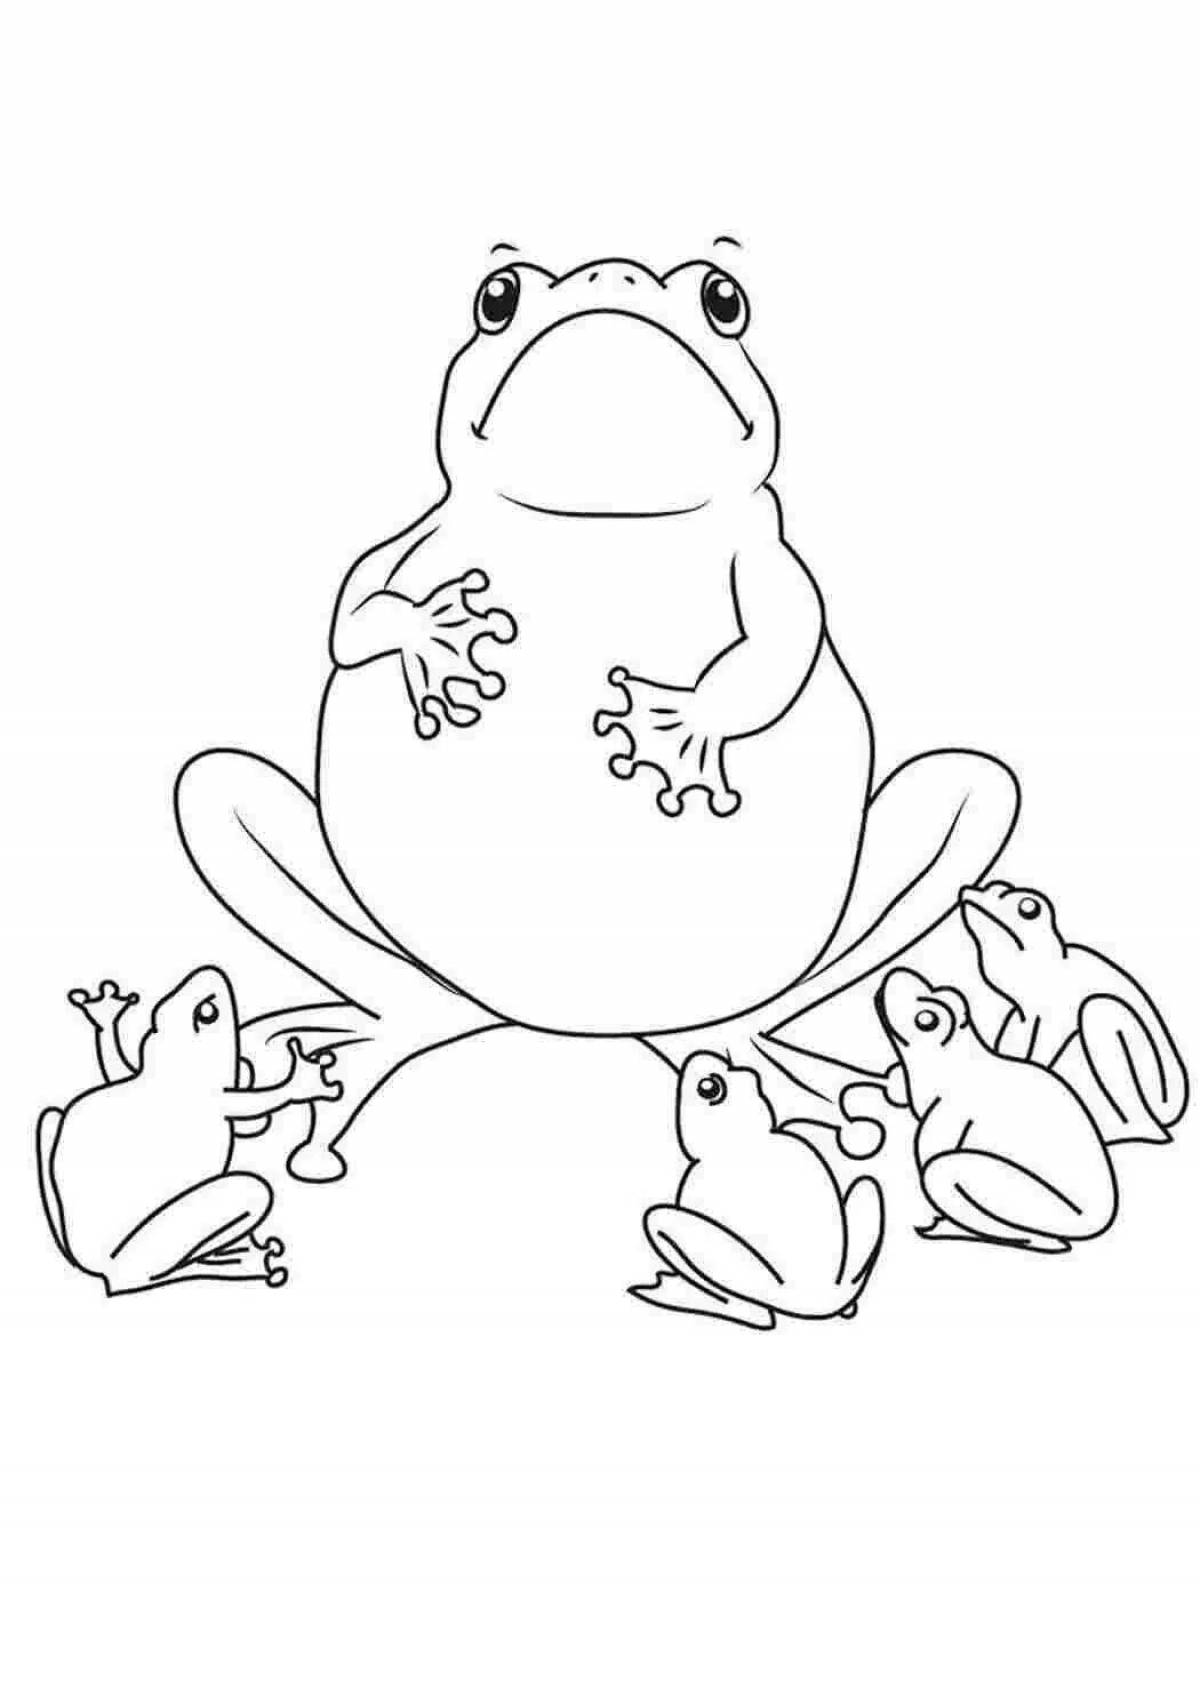 Coloring page dazzling frog